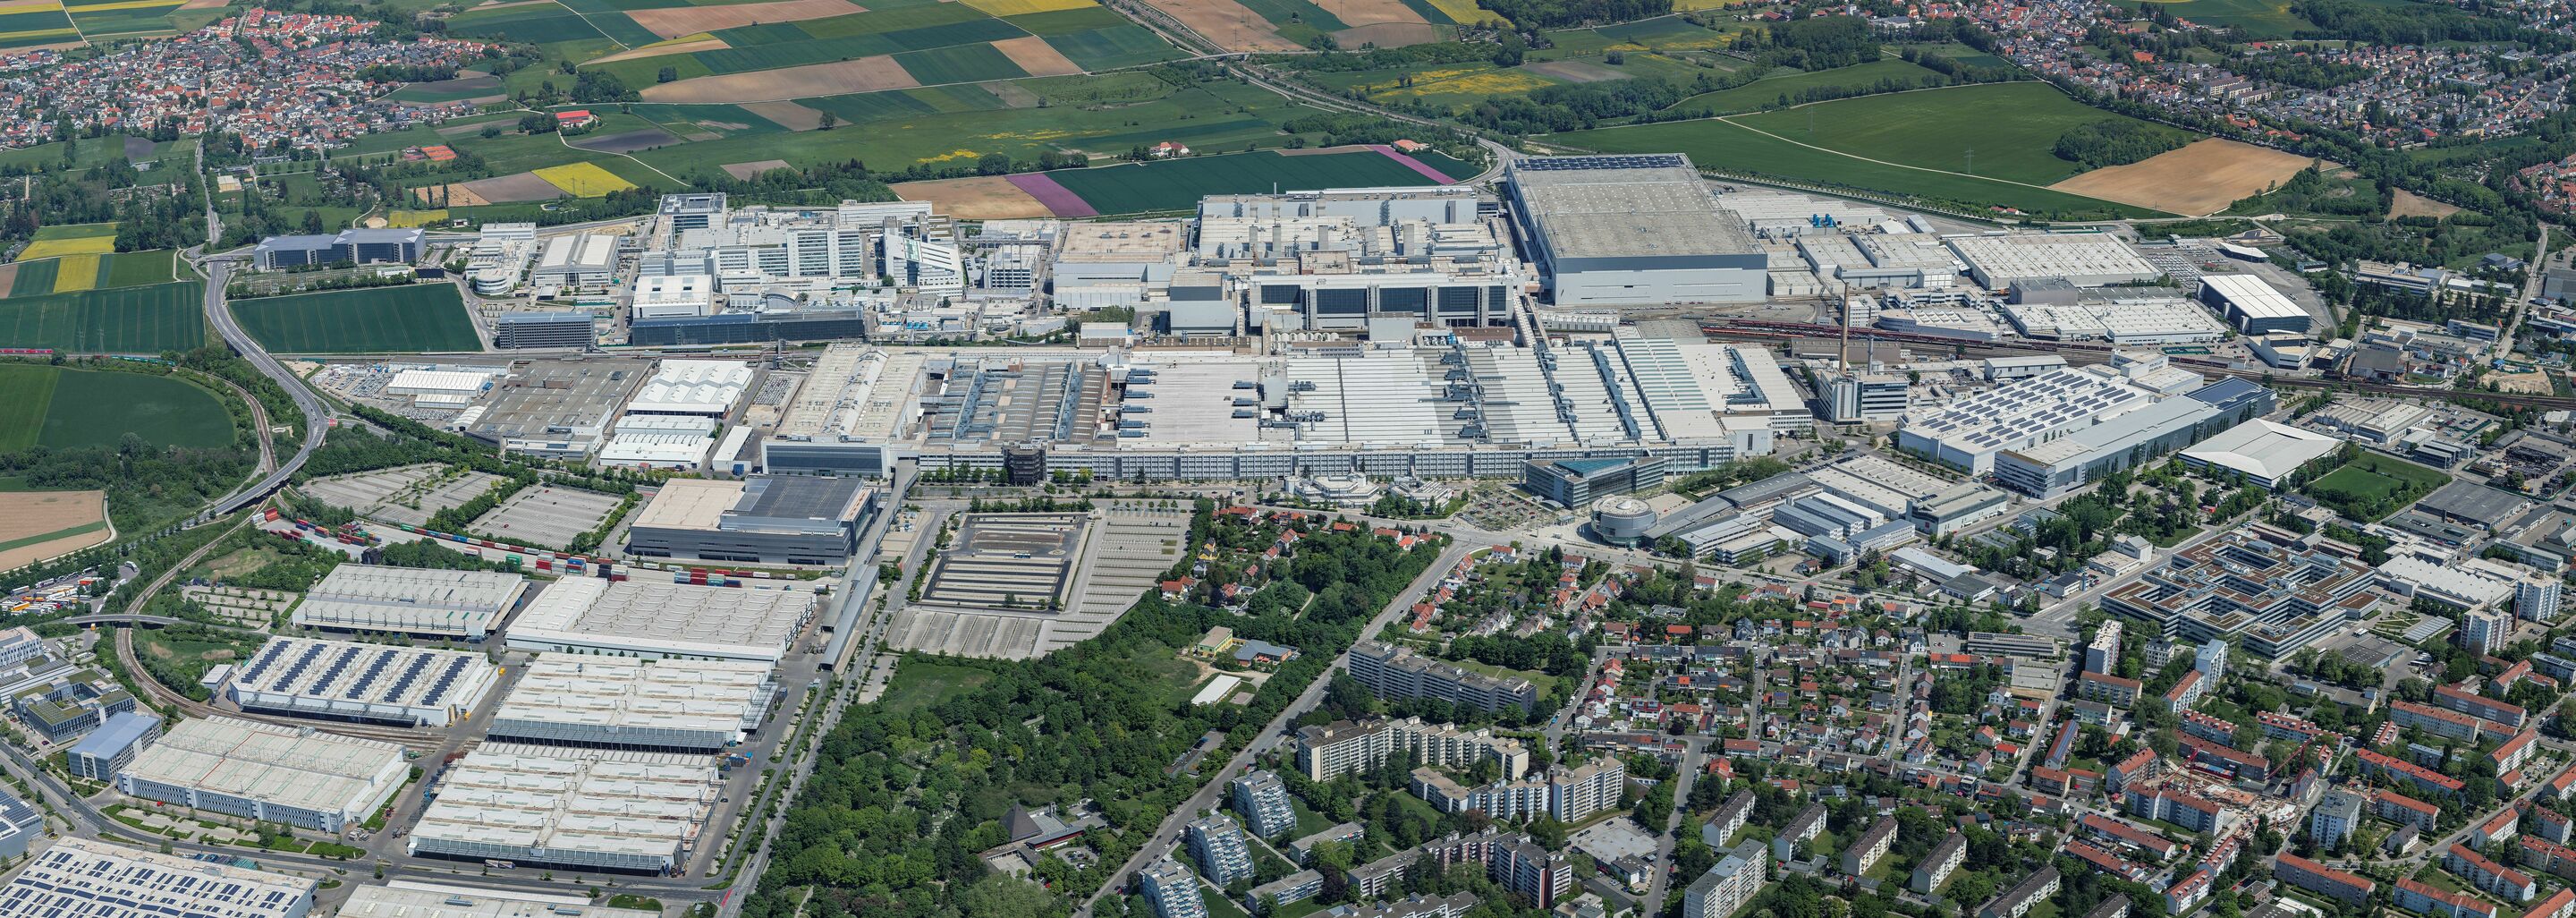 The plant in Ingolstadt is the Audi Group’s largest production site